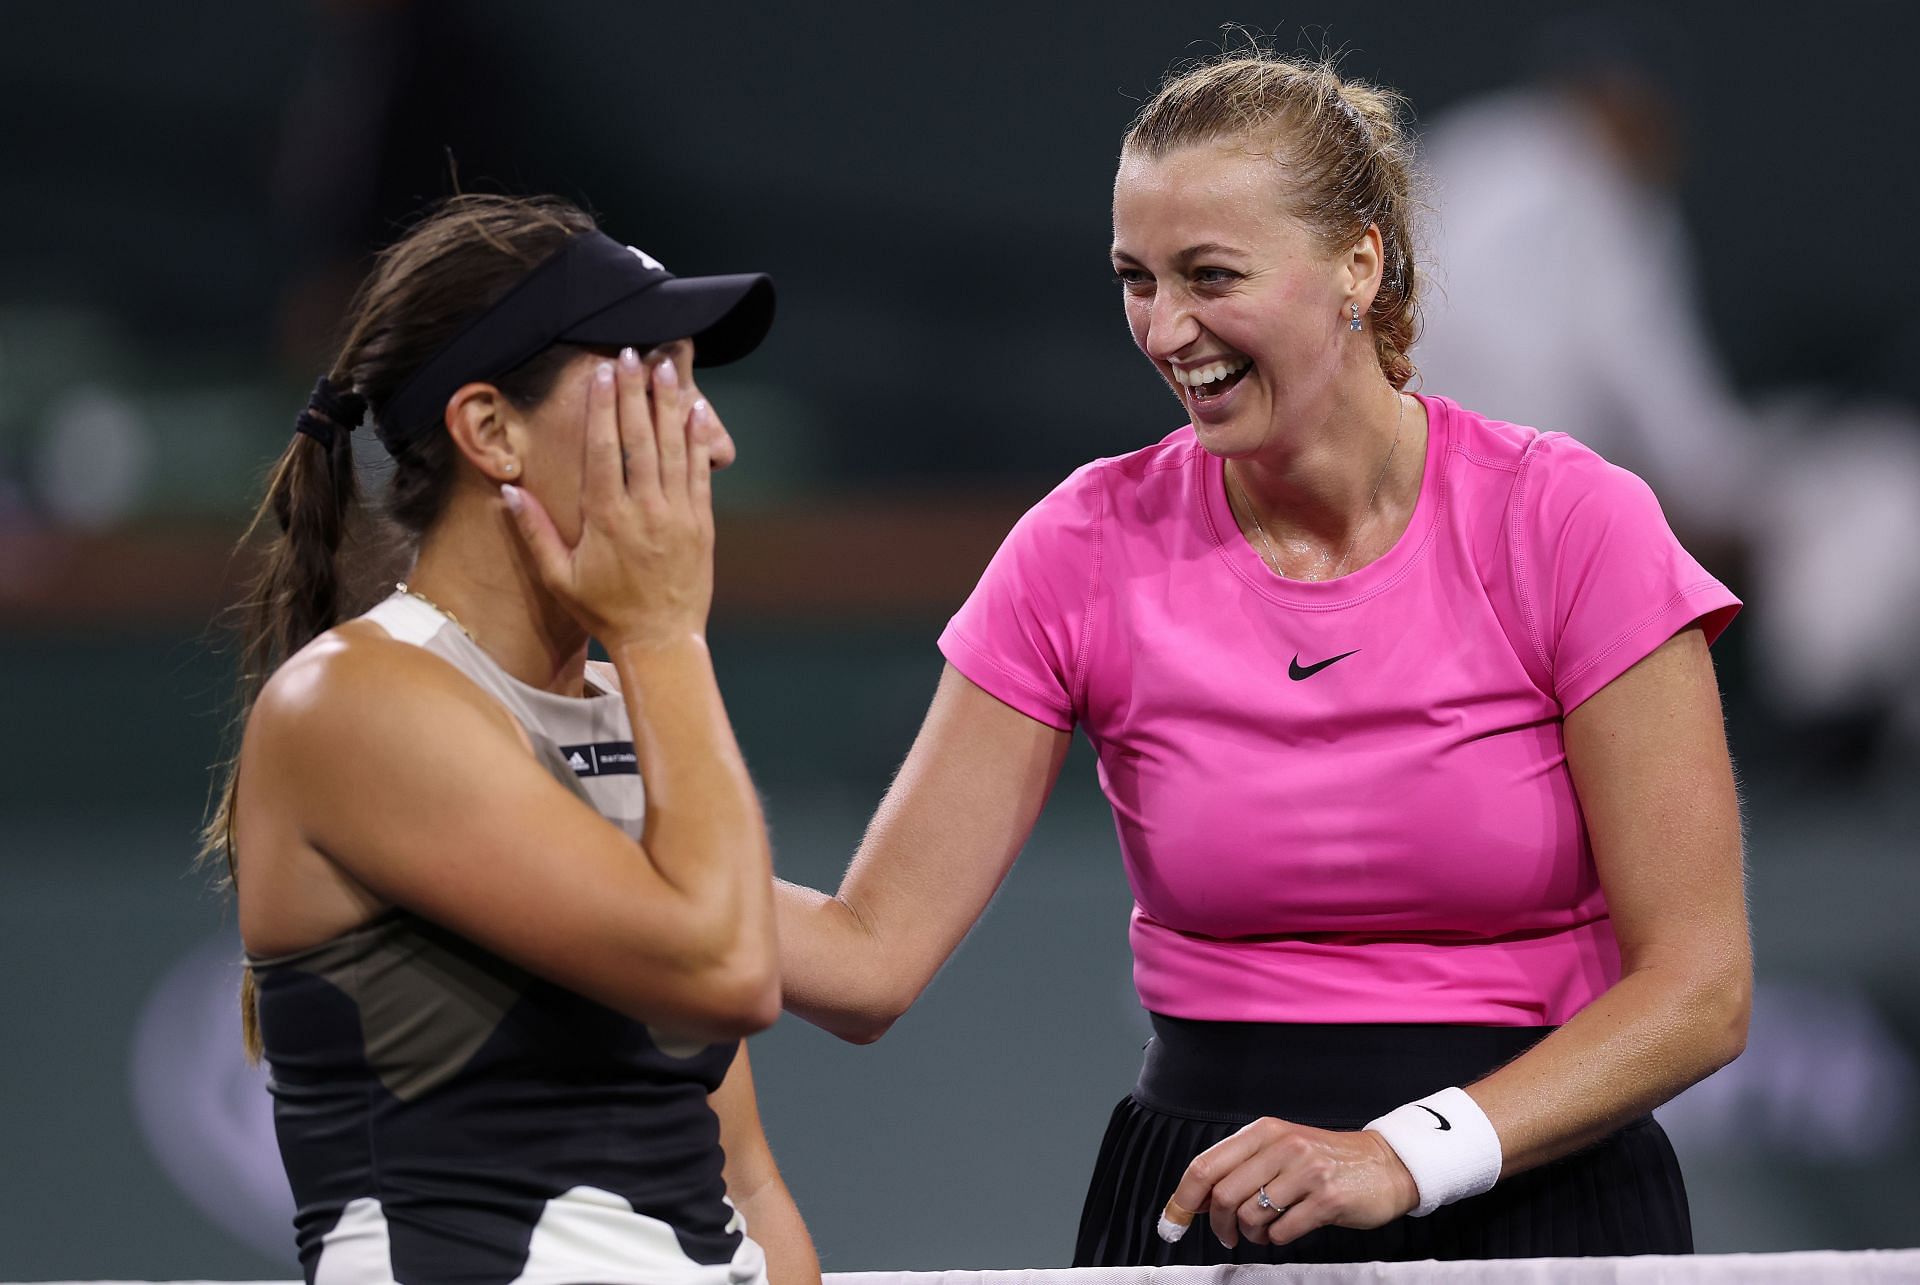 Petra Kvitova and Jessica Pegula greet each other at the net after their Indian Wells 2023 match.